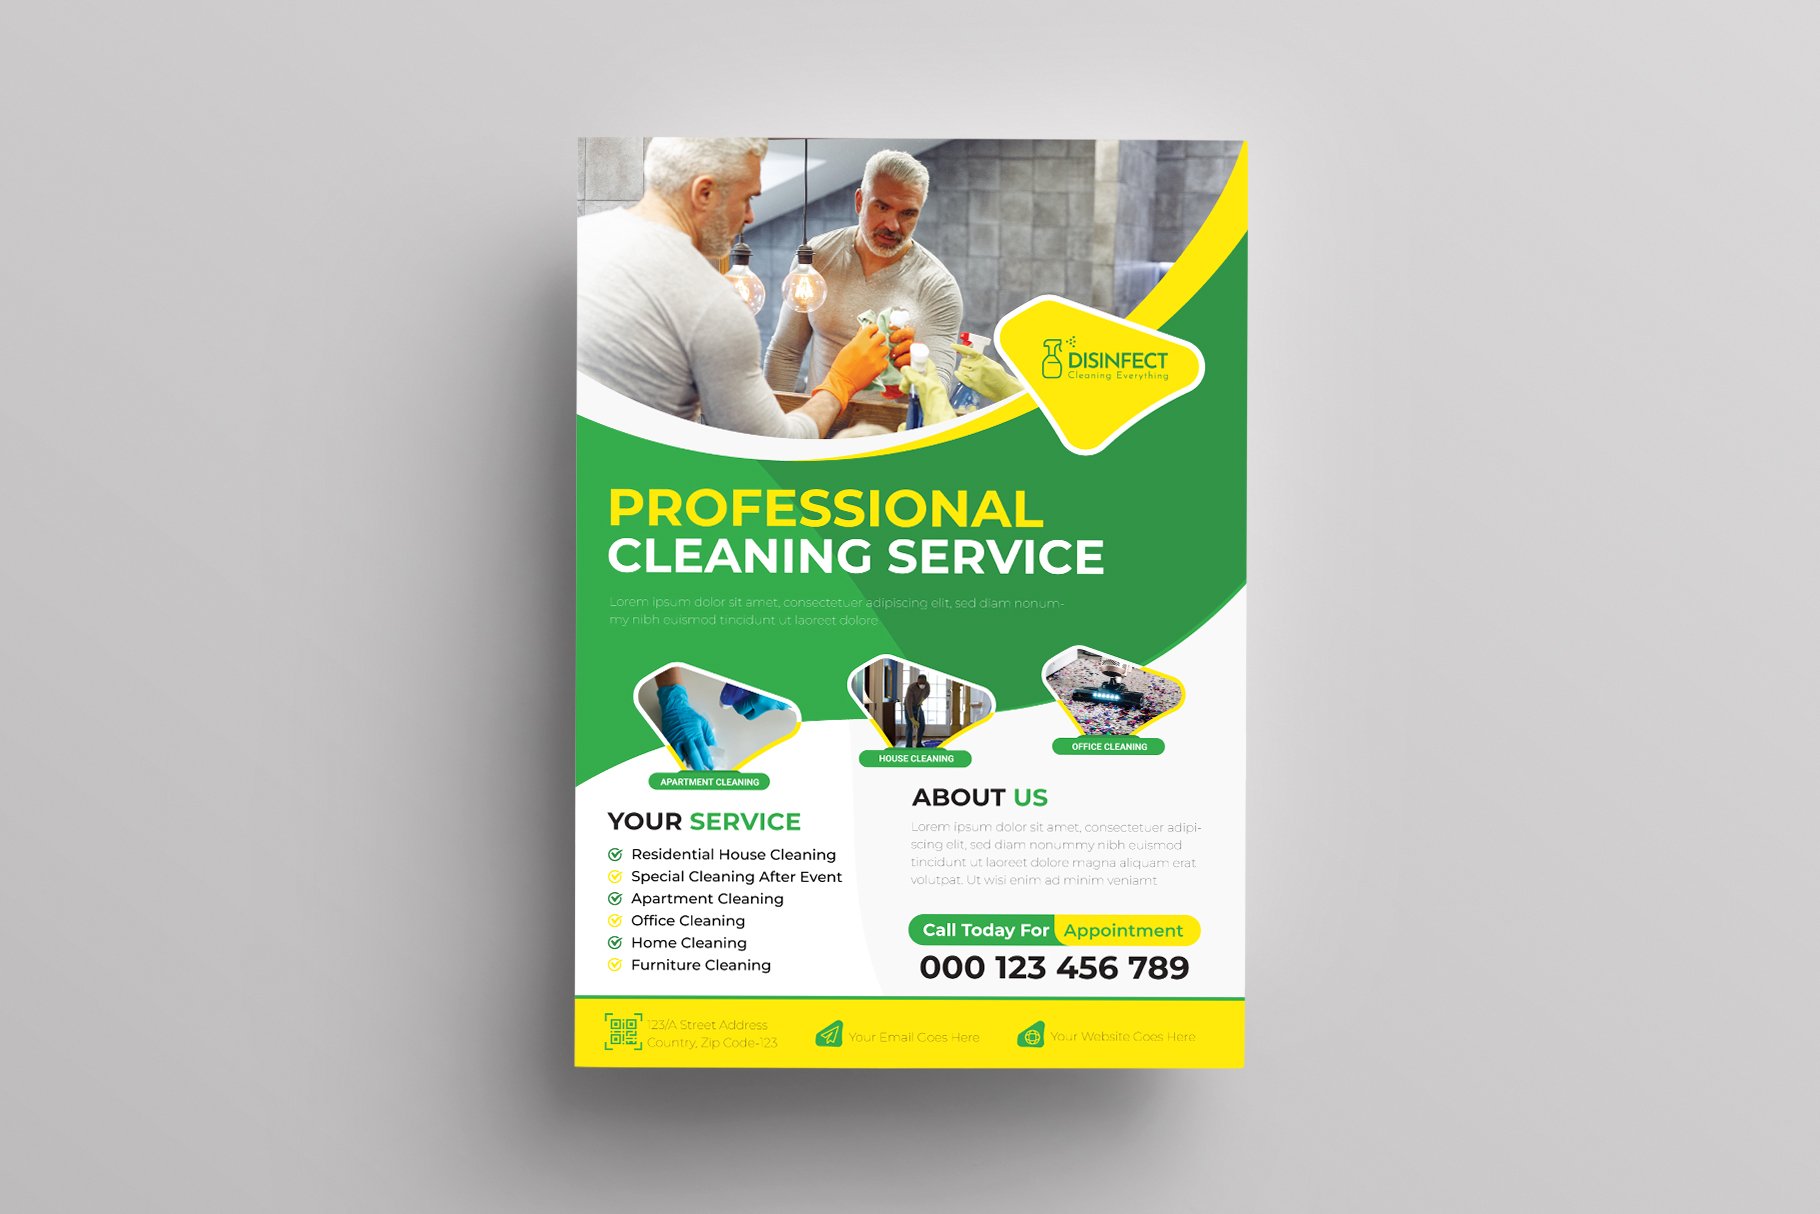 Cleaning Company Services Flyer cover image.